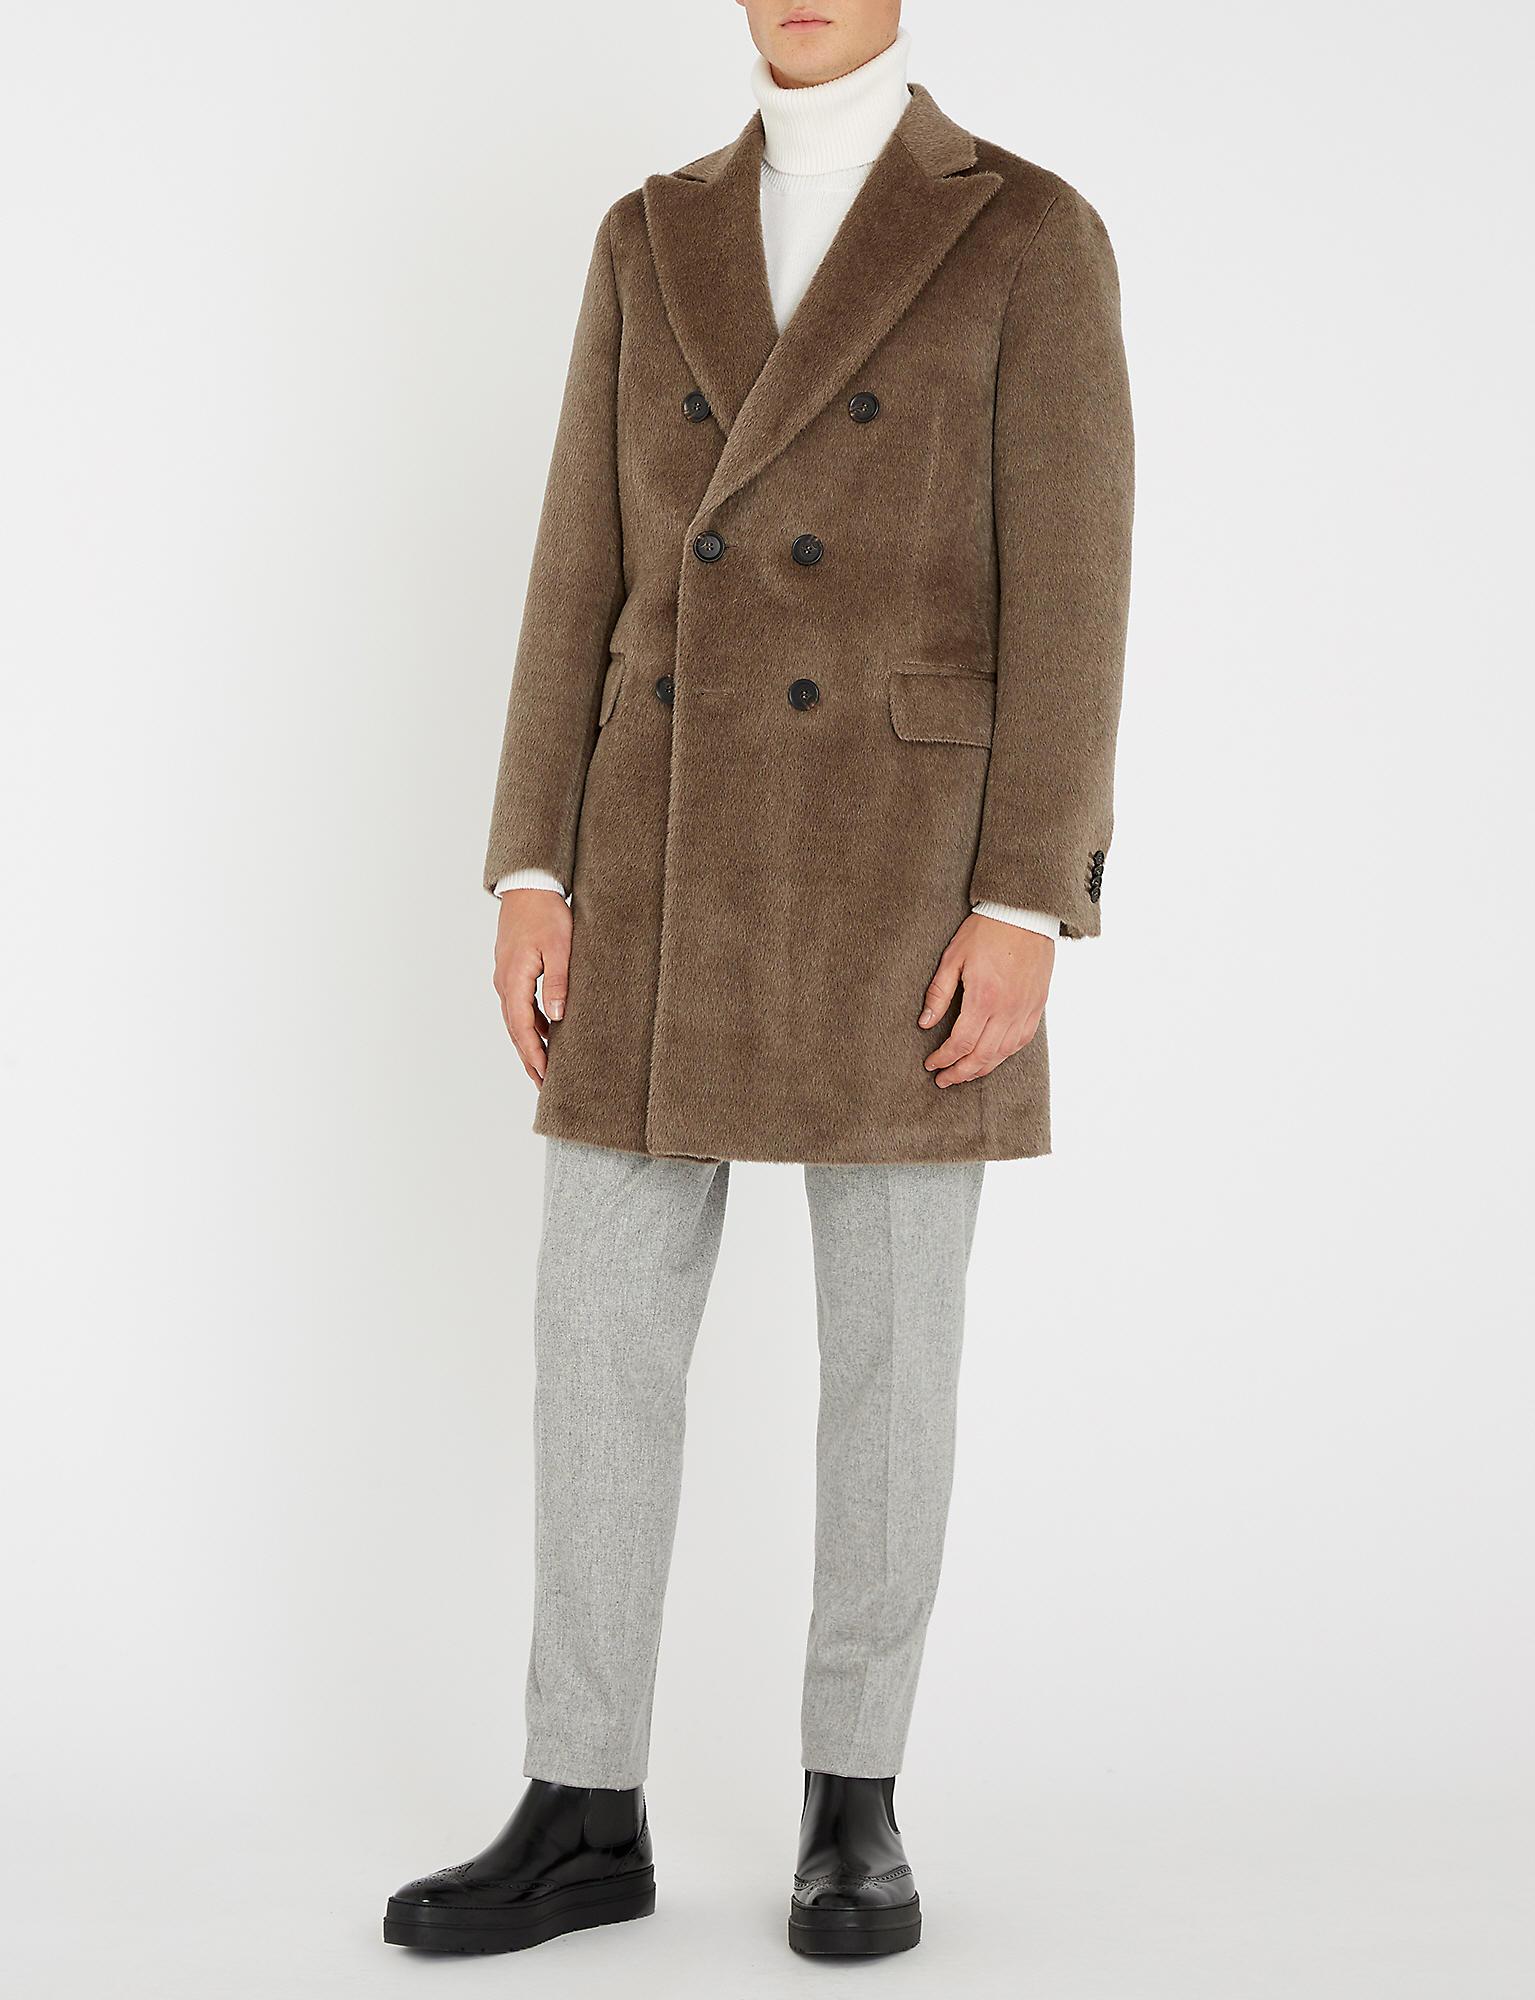 Oscar Jacobson Textured Alpaca And Wool-blend Coat in Brown for Men - Lyst